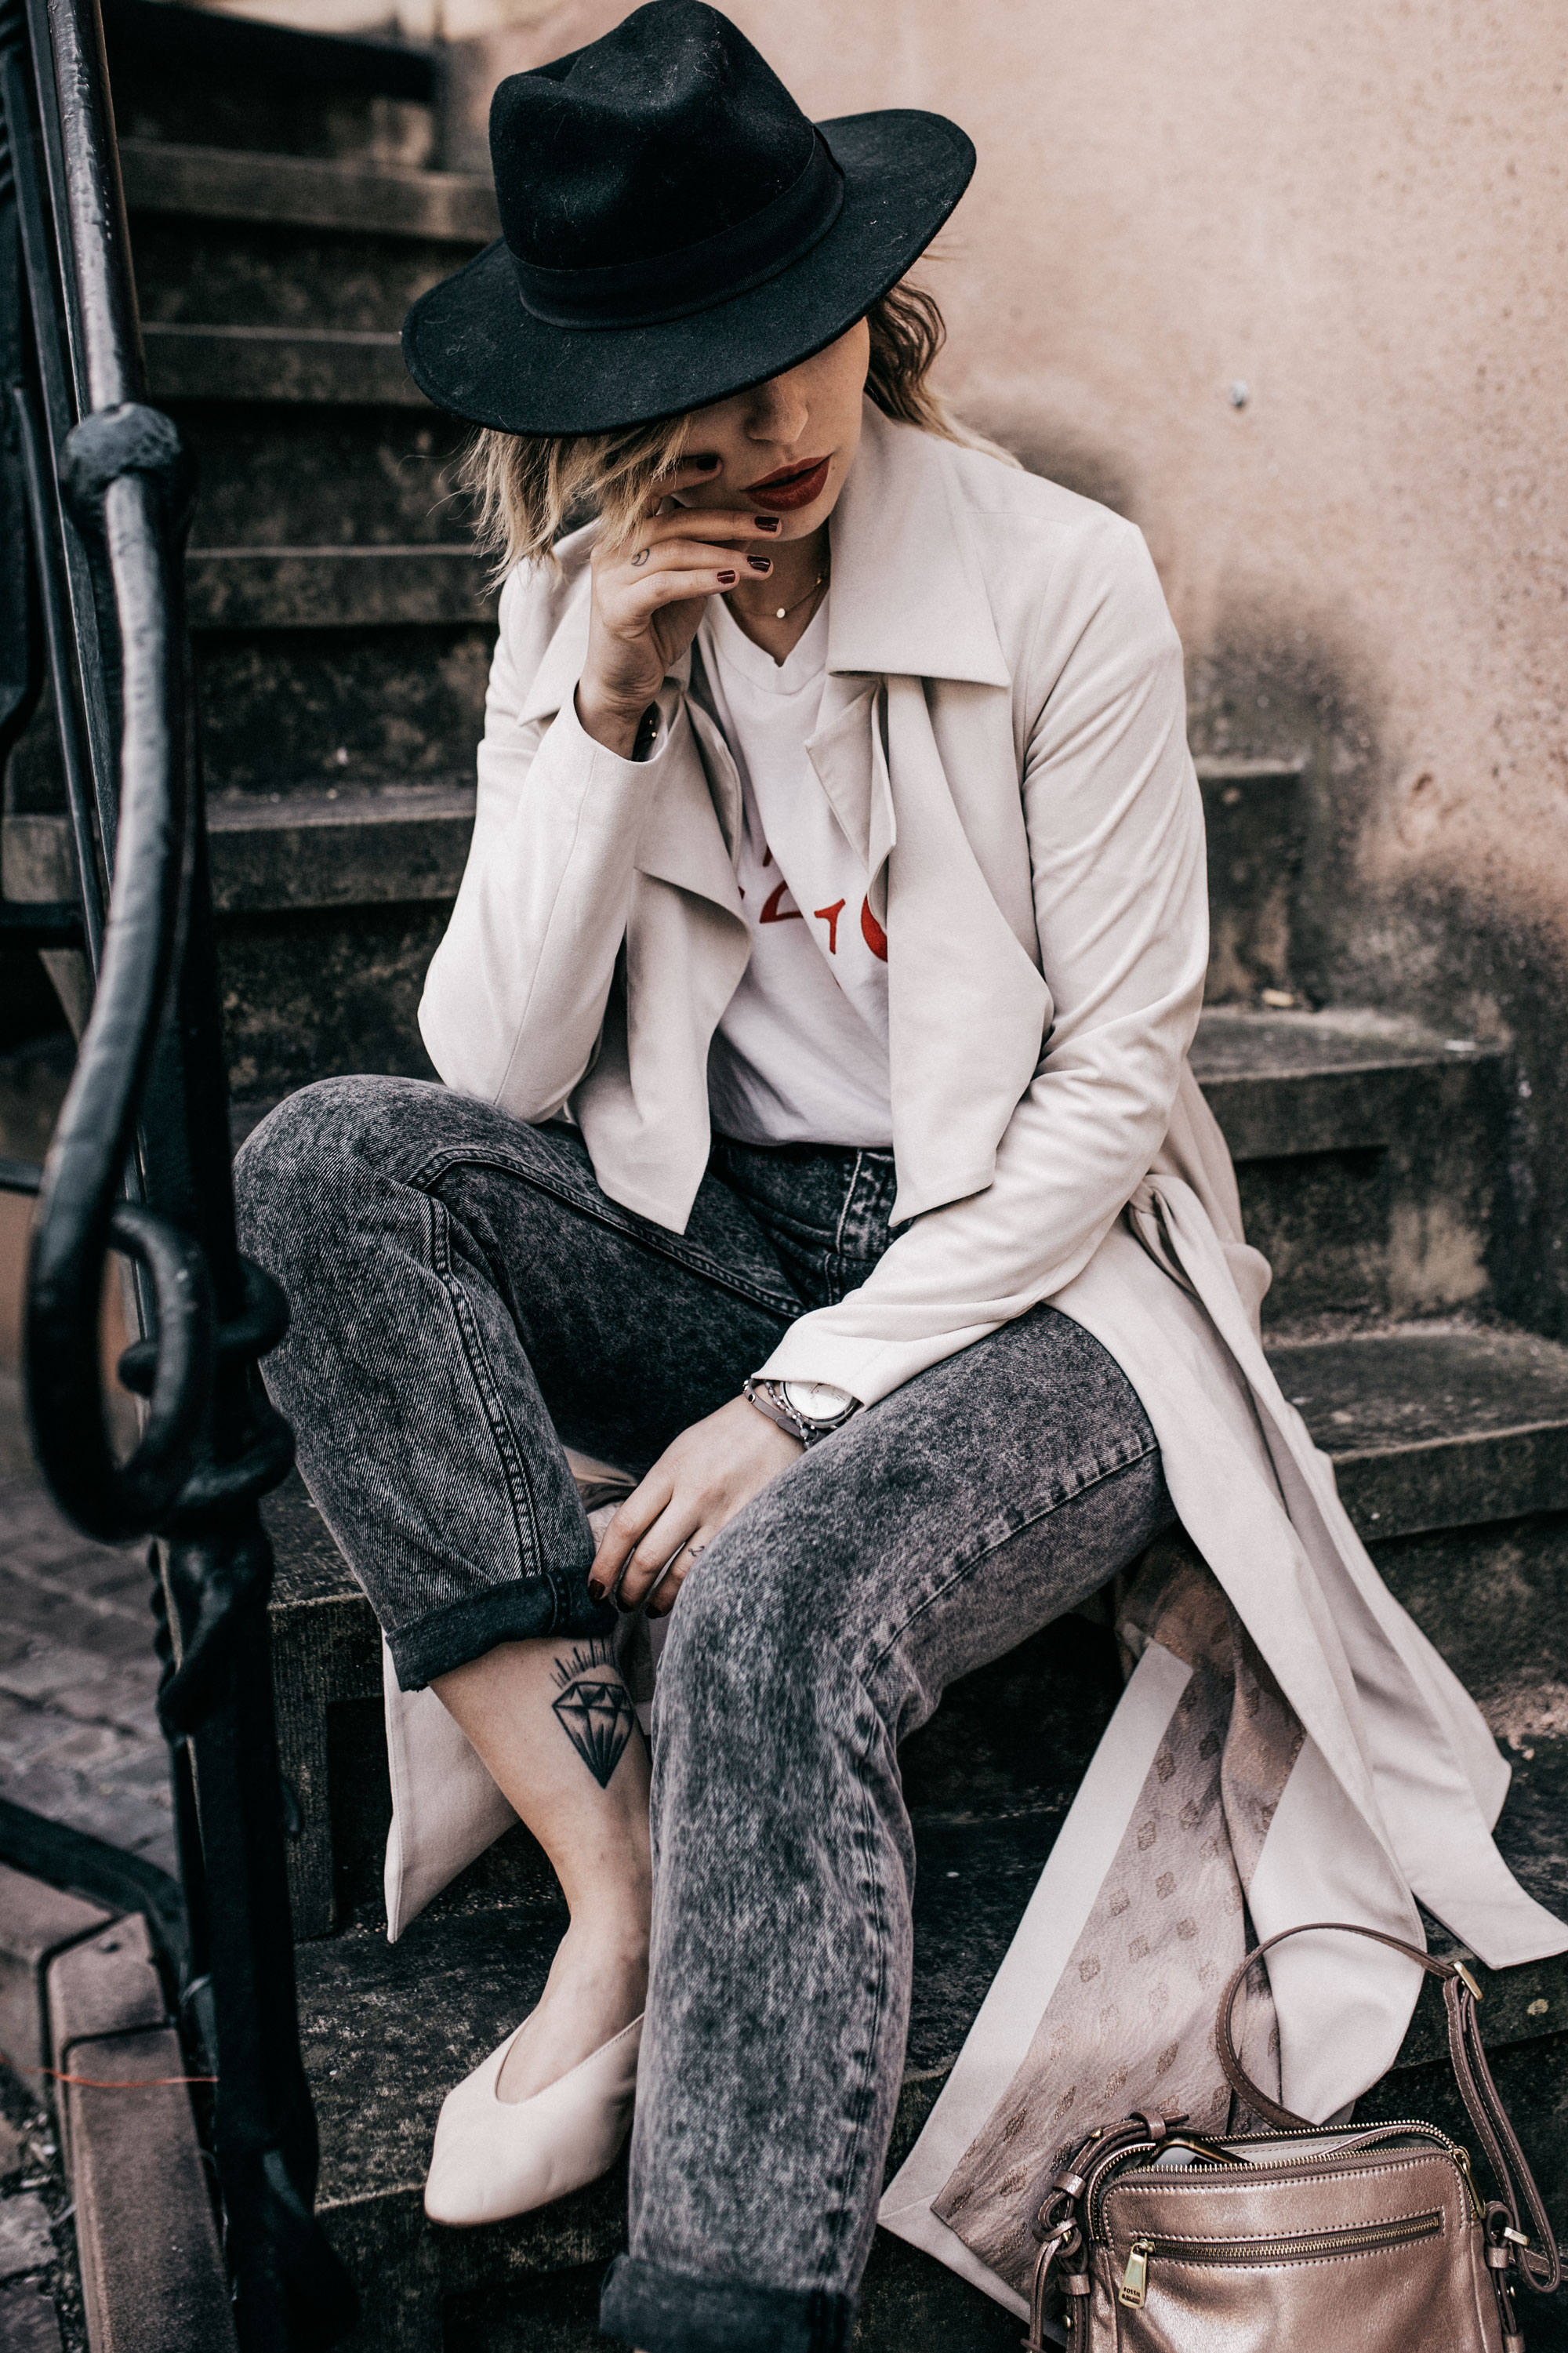 Street Style in France | style: effortless, simple, french, nude tones, spring, edgy, cool | wearing a shirt (reve), mom jeans, a trench coat and my Fossil Hybrid Smartwatch